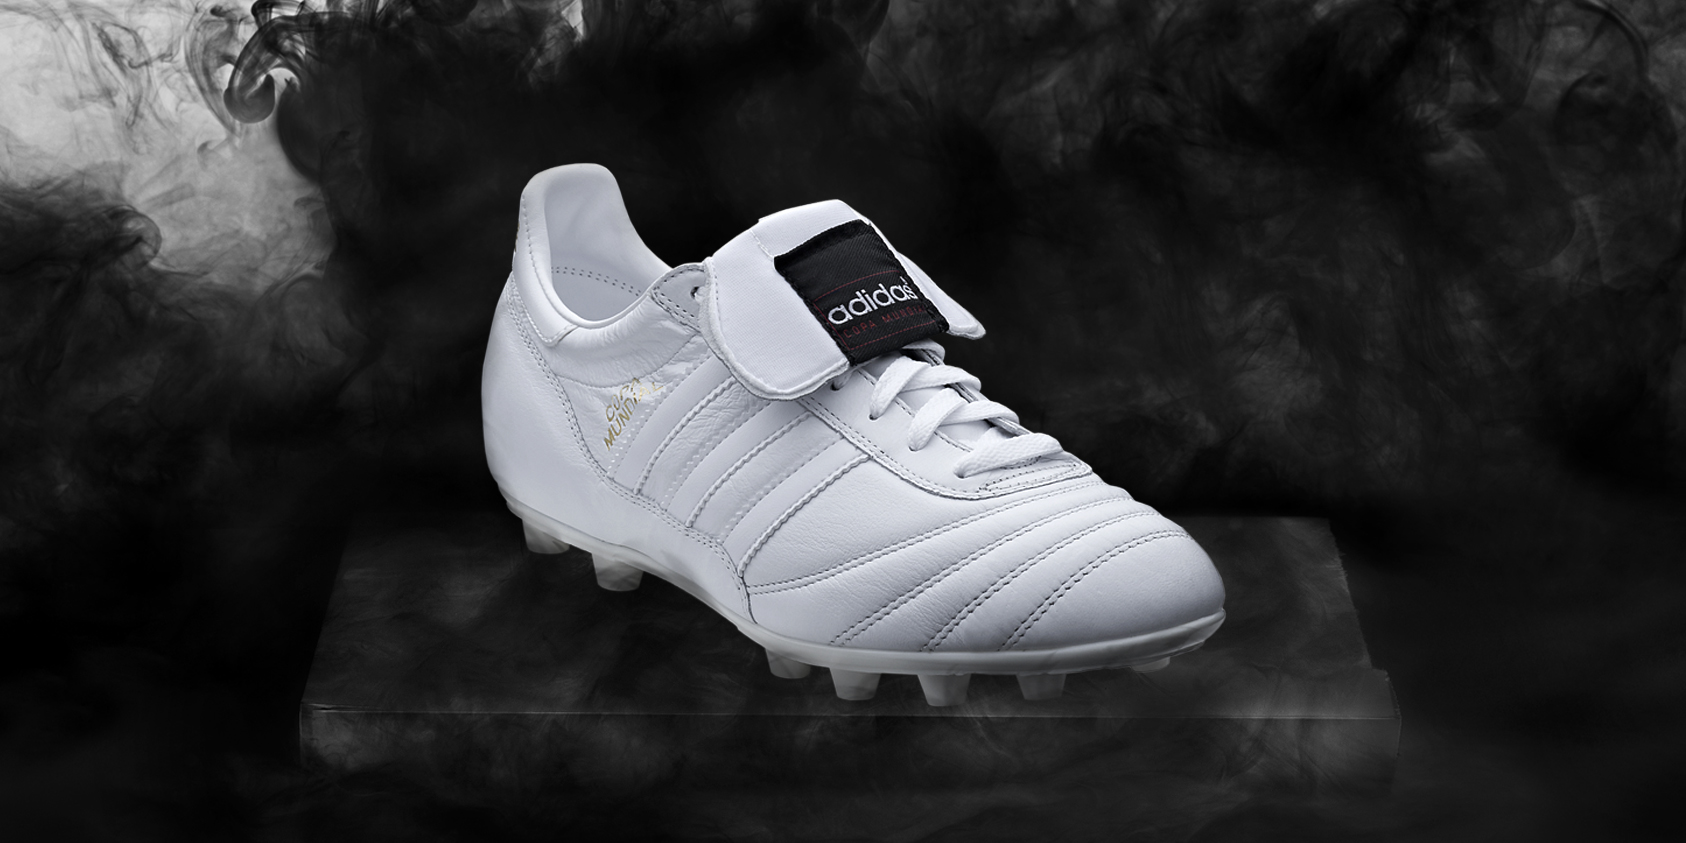 copa mundial white out